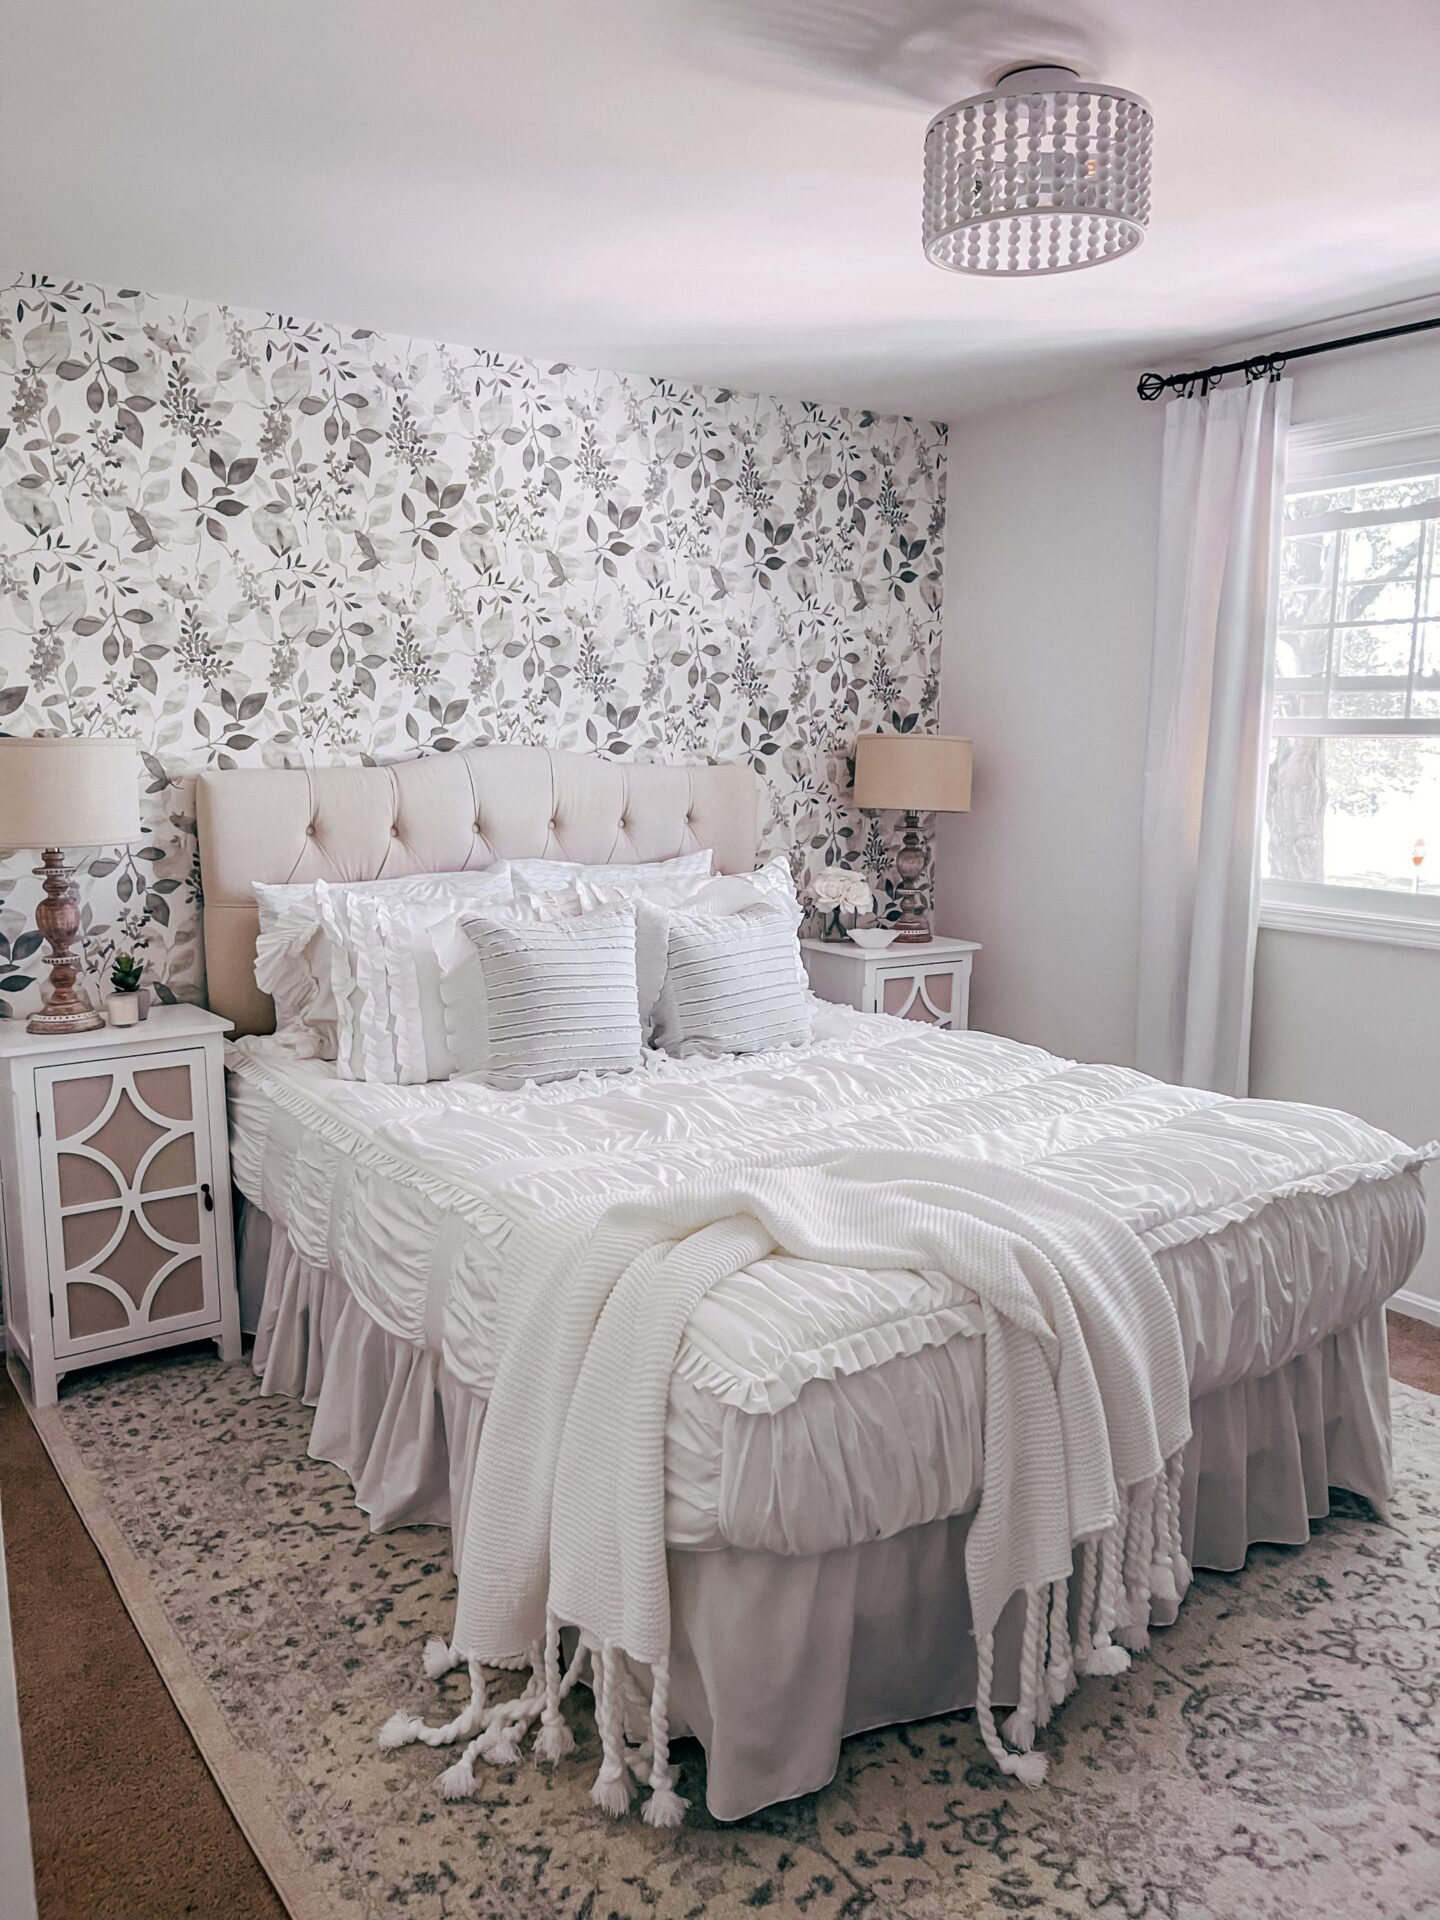 beddy's zip bedding for guest bedroom makeover on a budget by lifestyle blogger Angela Lanter